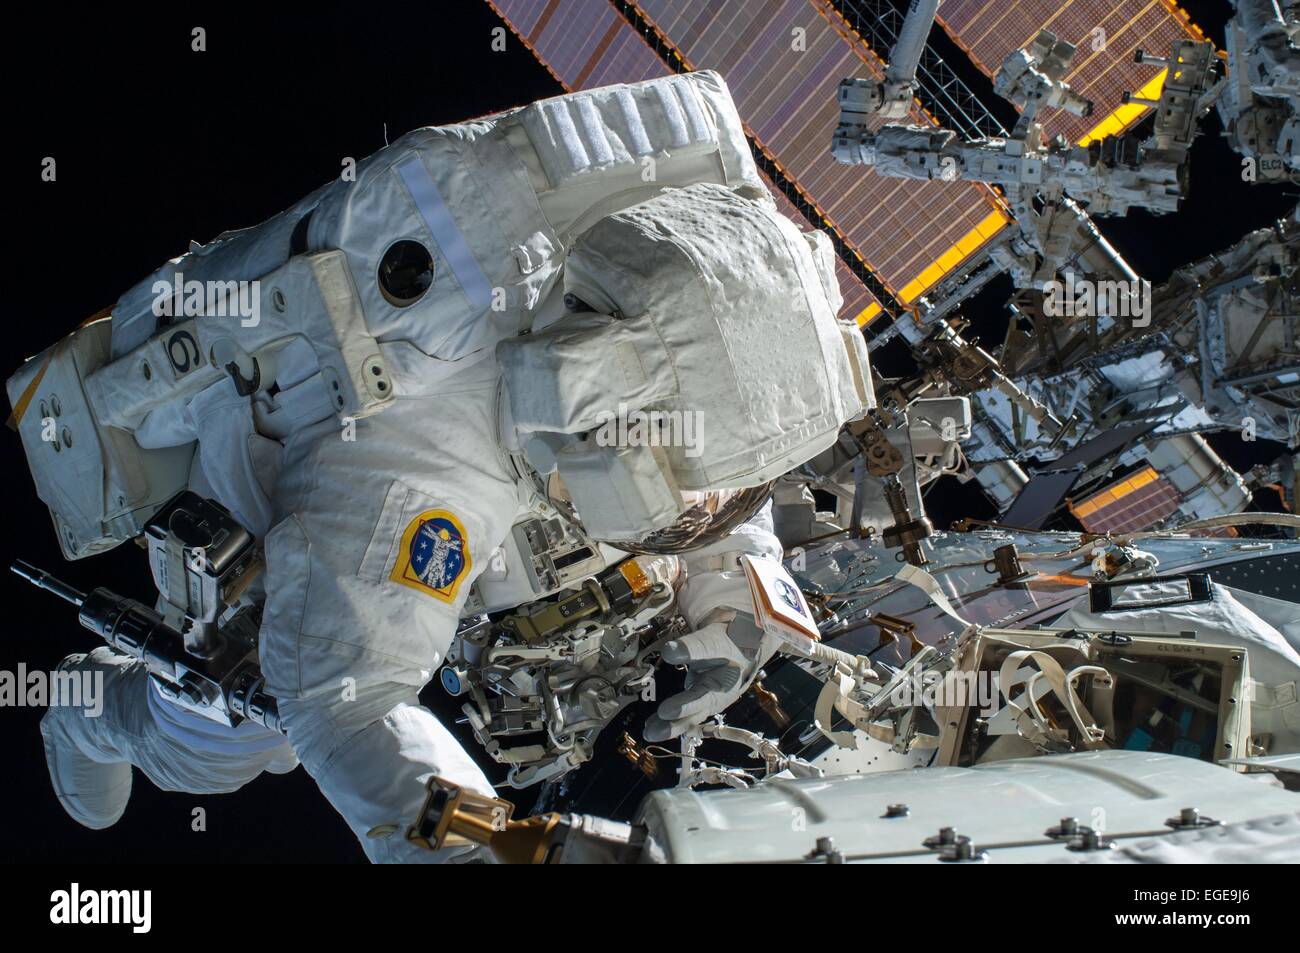 NASA astronaut Terry Virts Flight Engineer of Expedition 42 during a spacewalk to route cables on the ISS February 23, 2015 in Earth Orbit. Virts and fellow astronaut Barry Wilmore completed a 6-hour, 41-minute spacewalk routing more than 300 feet of cable as part of a reconfiguration of the International Space Station to enable U.S. commercial crew vehicles under development to dock to the space station in the coming years. Stock Photo